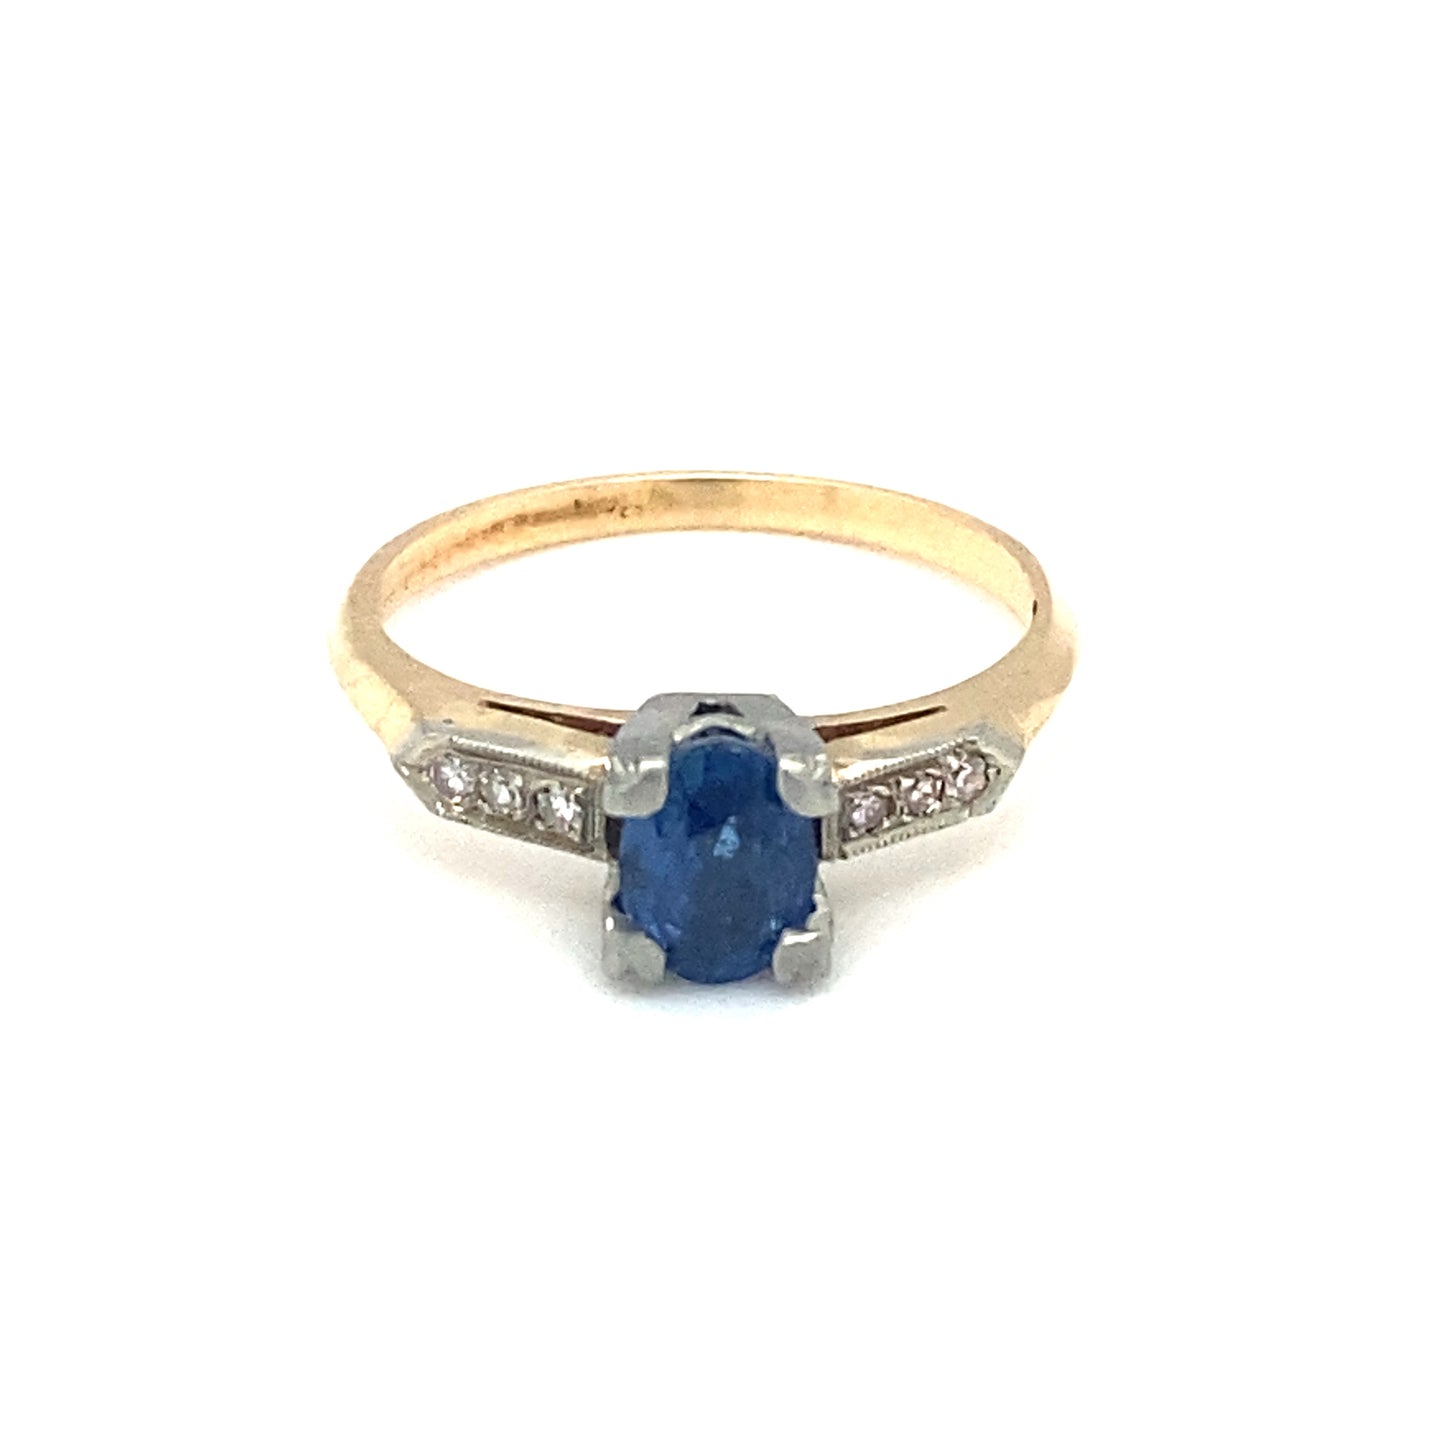 Circa 1920s 1.0ct Oval No Heat Sapphire and Diamond Ring in Two Tone Gold